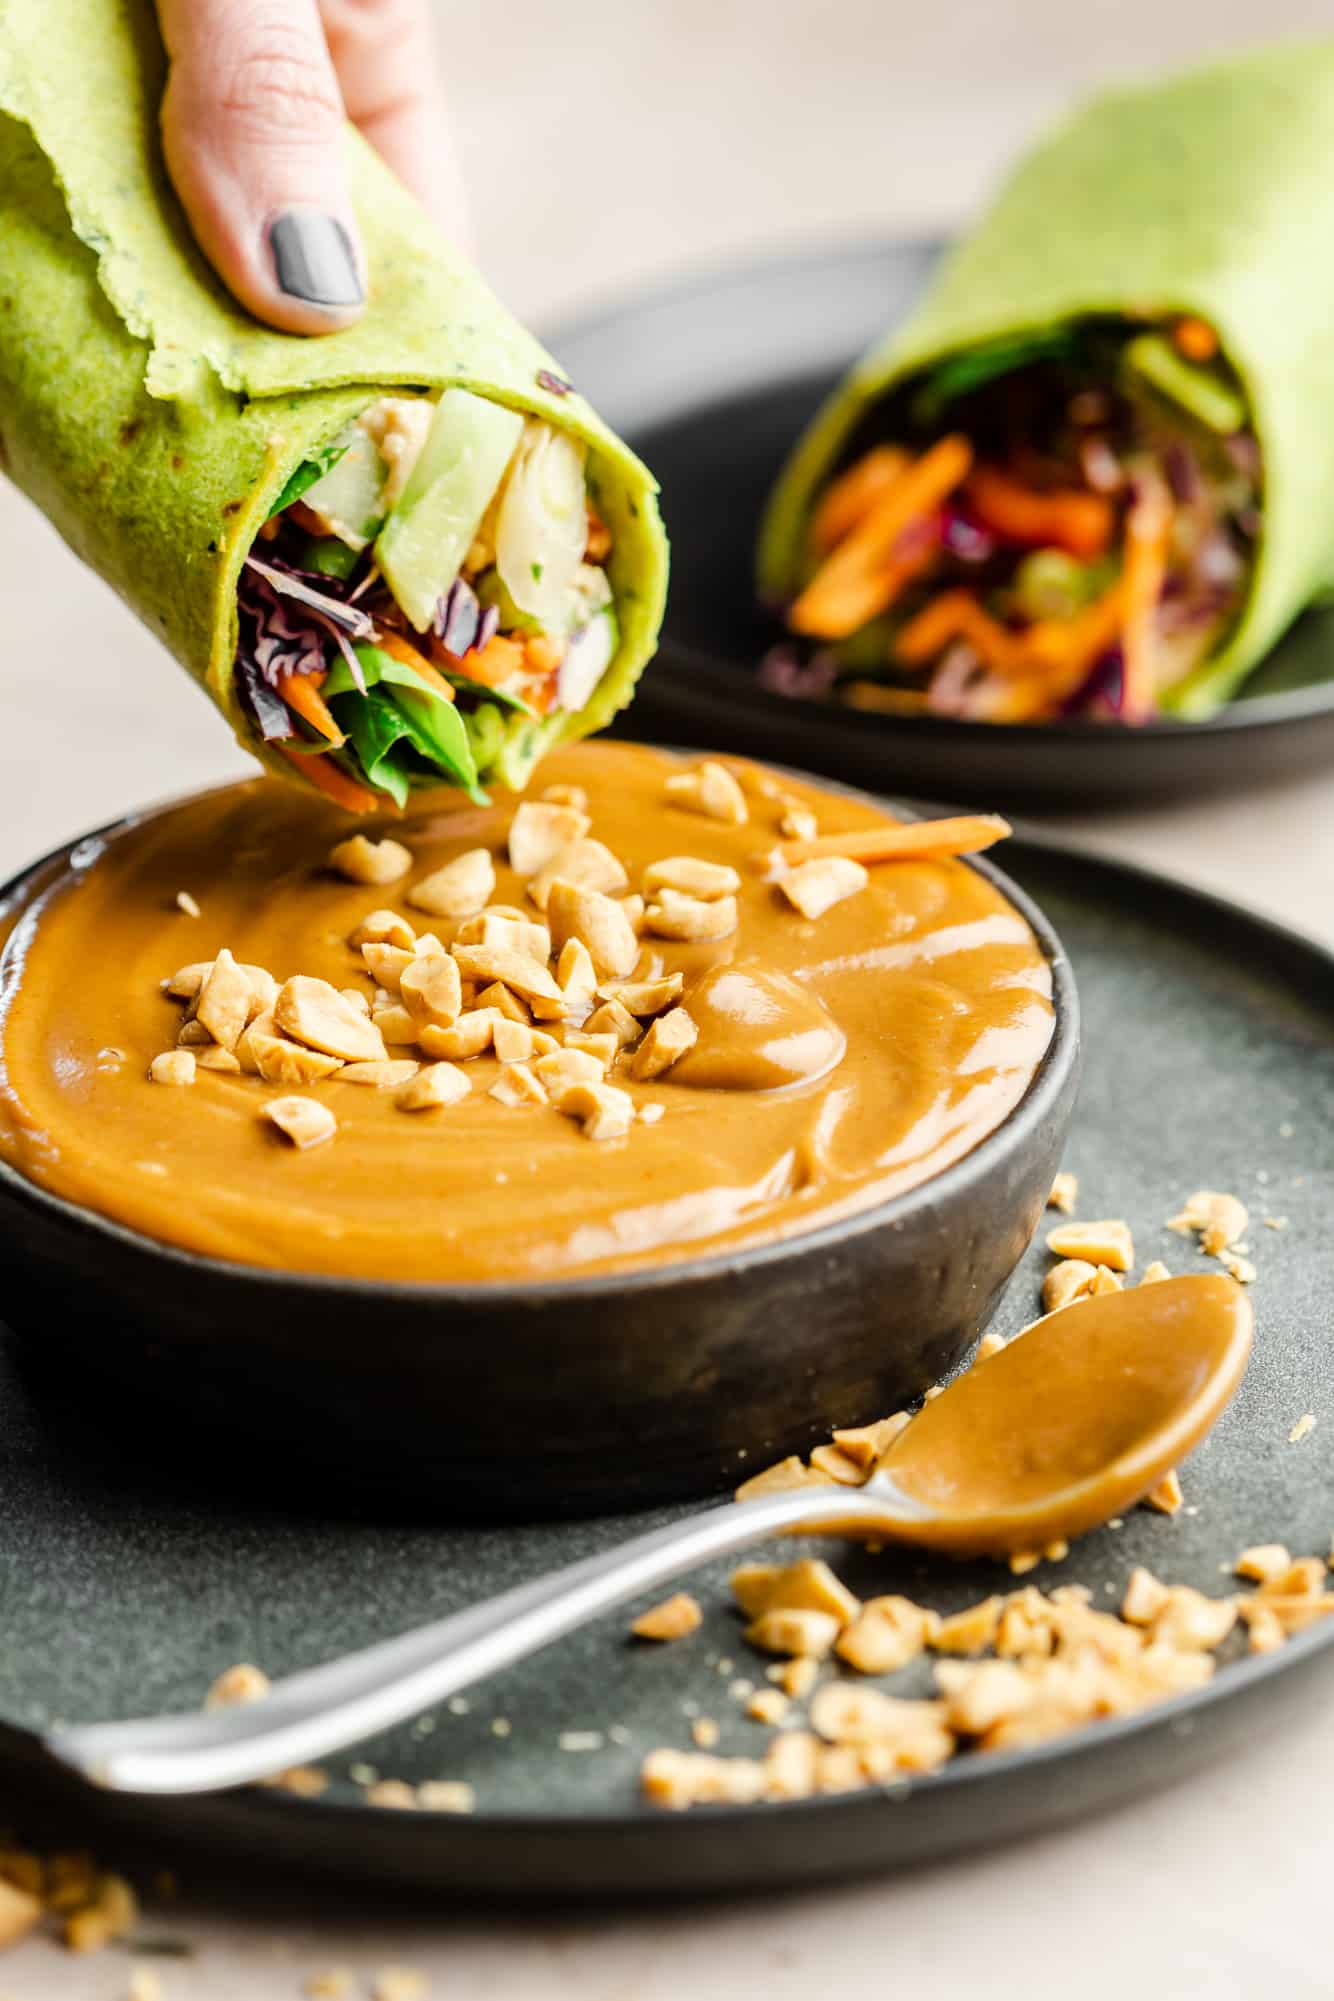 dipping a vegetable wrap into a bowl of peanut sauce.